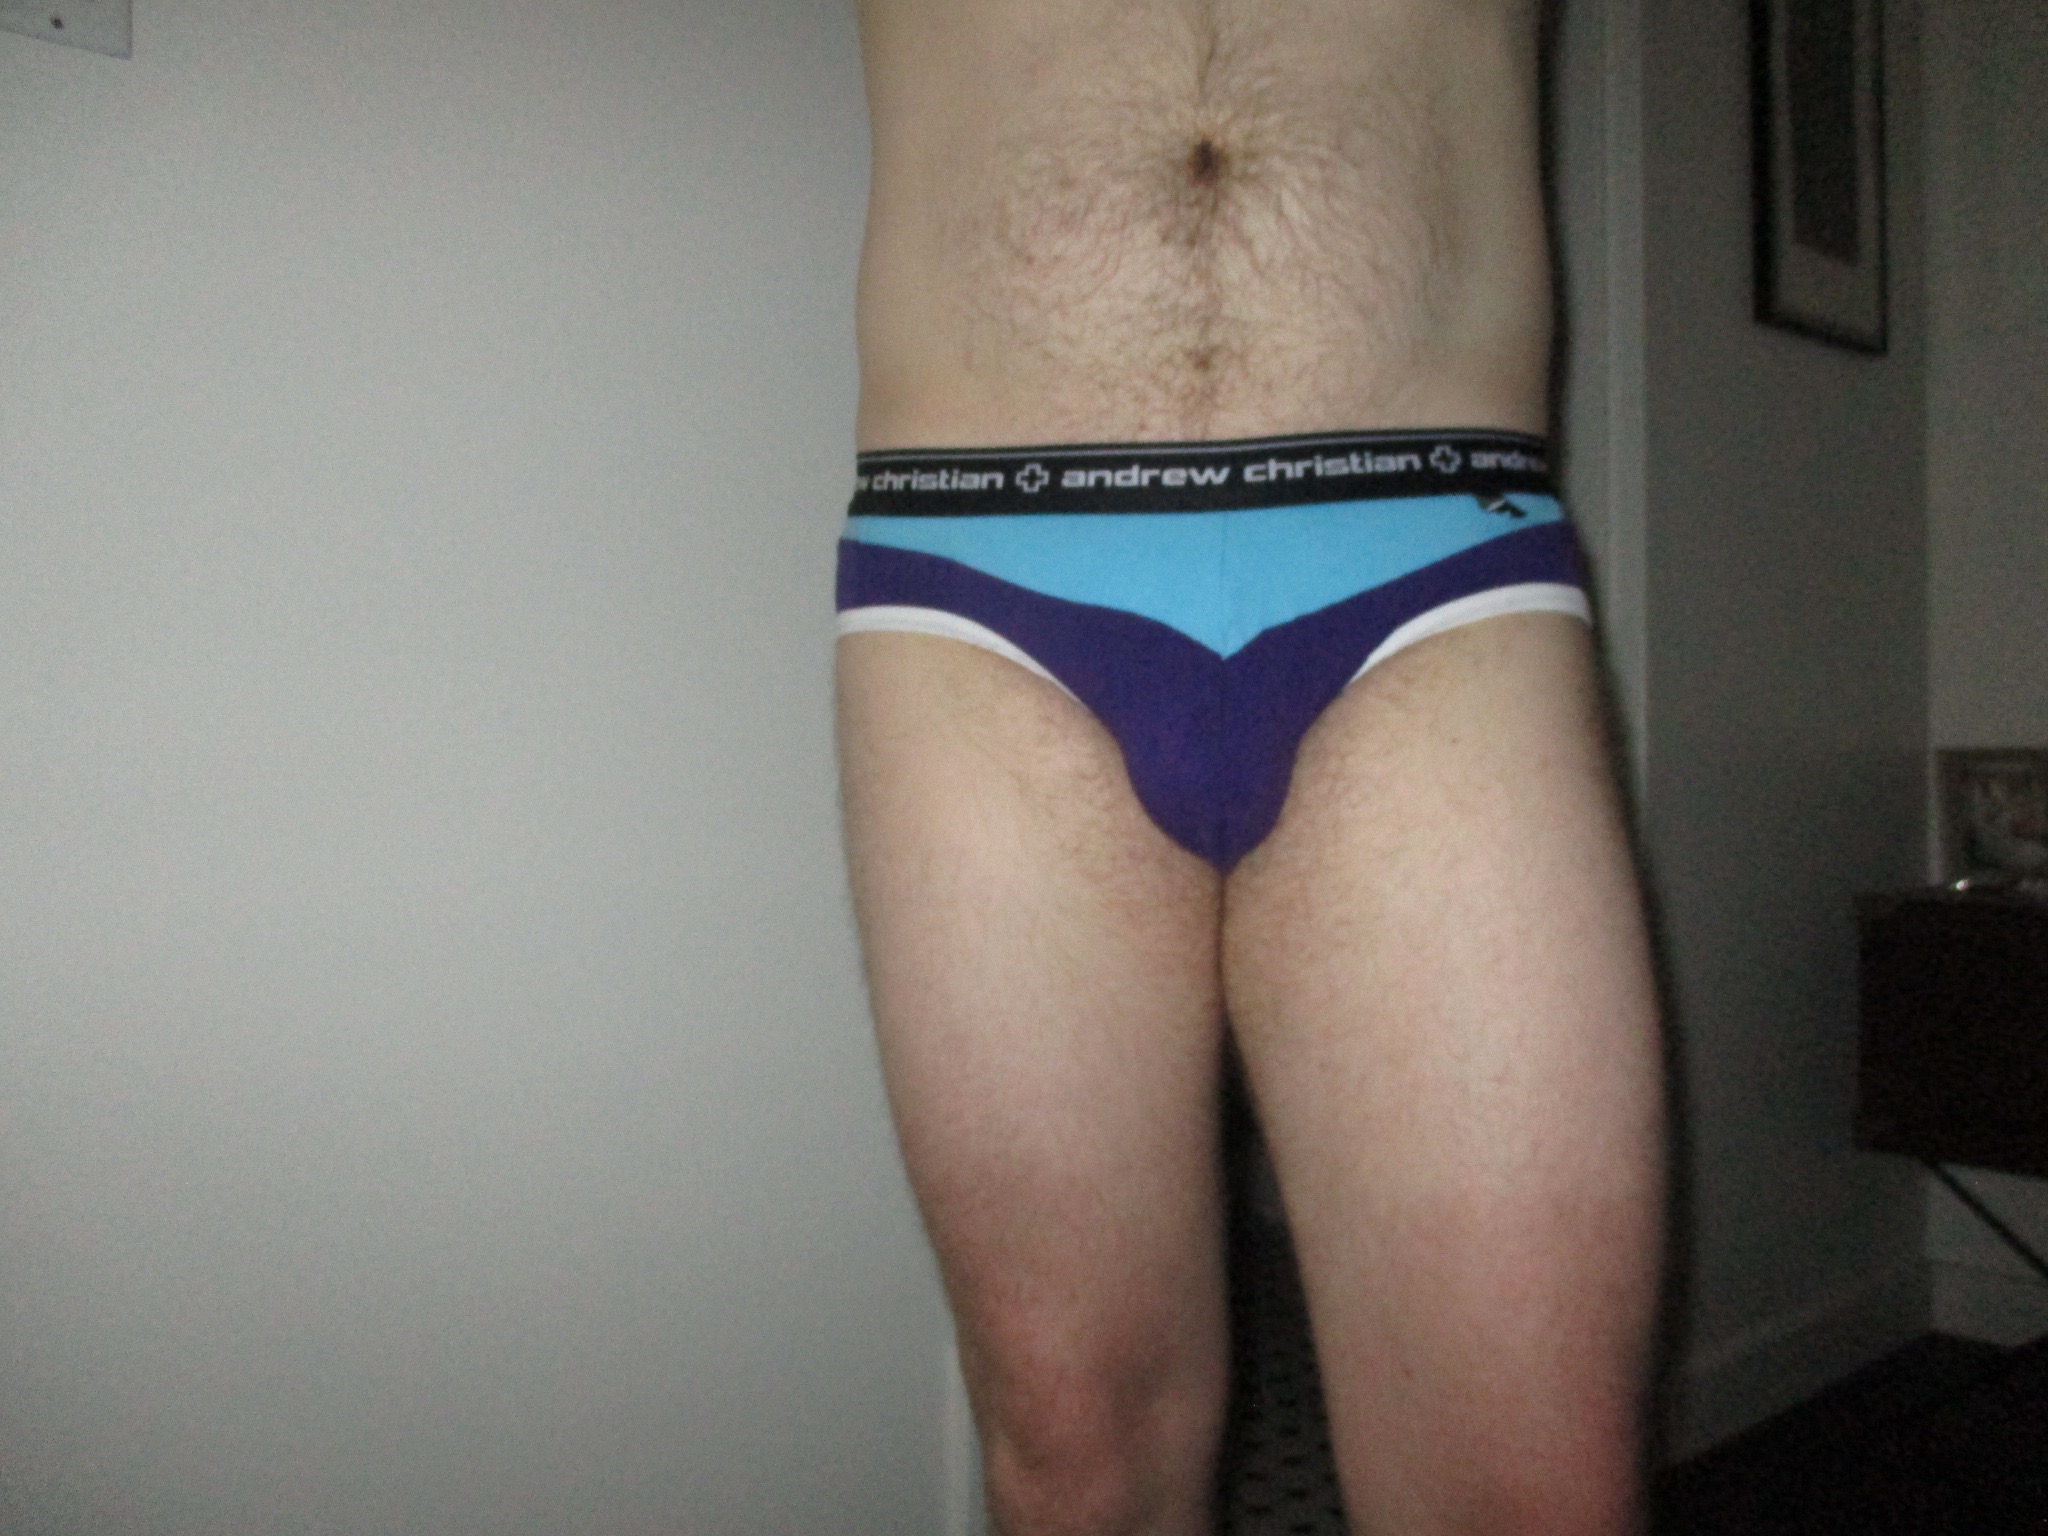 One of a Kind briefs…at least I think…